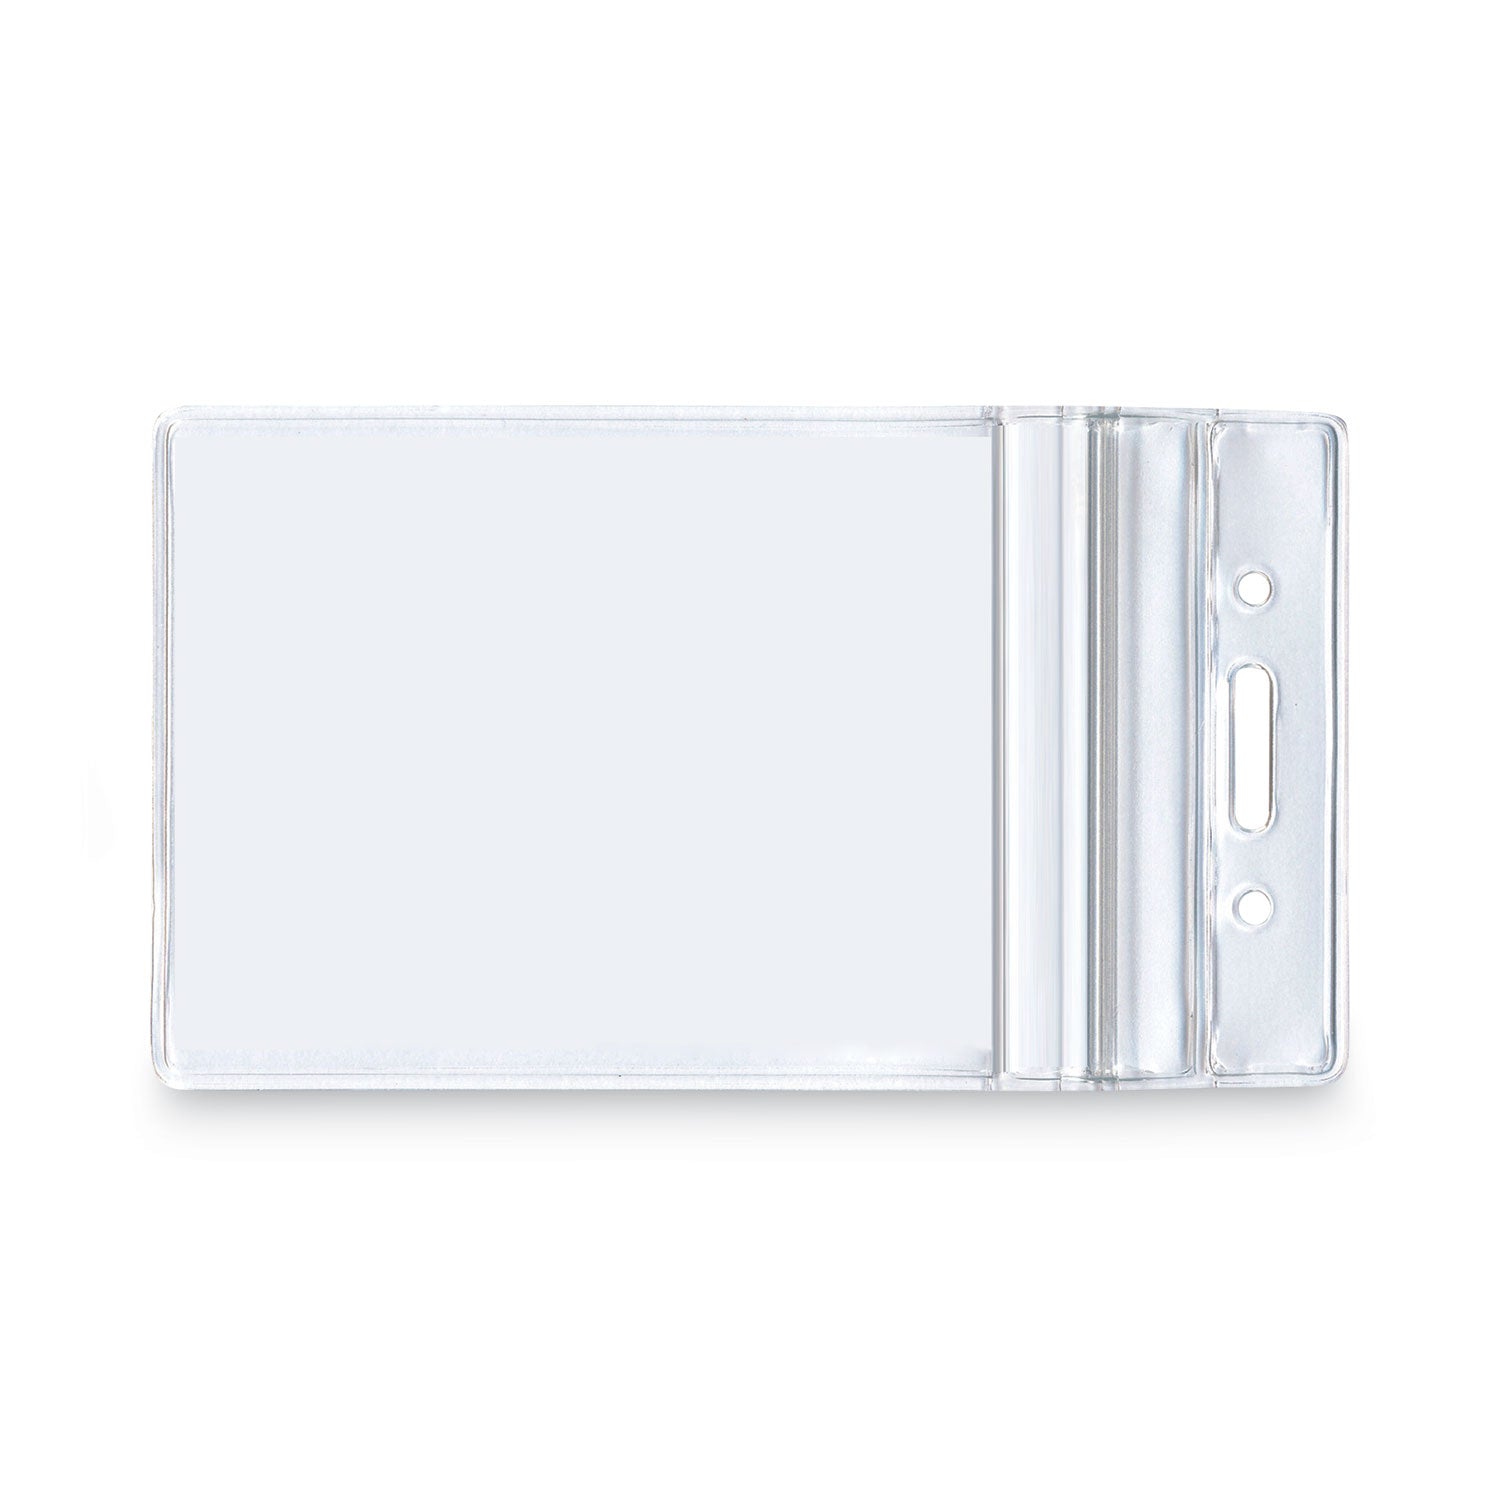 Resealable ID Badge Holders, Vertical Orientation, Transparent Frost 2.68" x 5" Holder, 2.38" x 3.75" Insert, 50/Pack - 